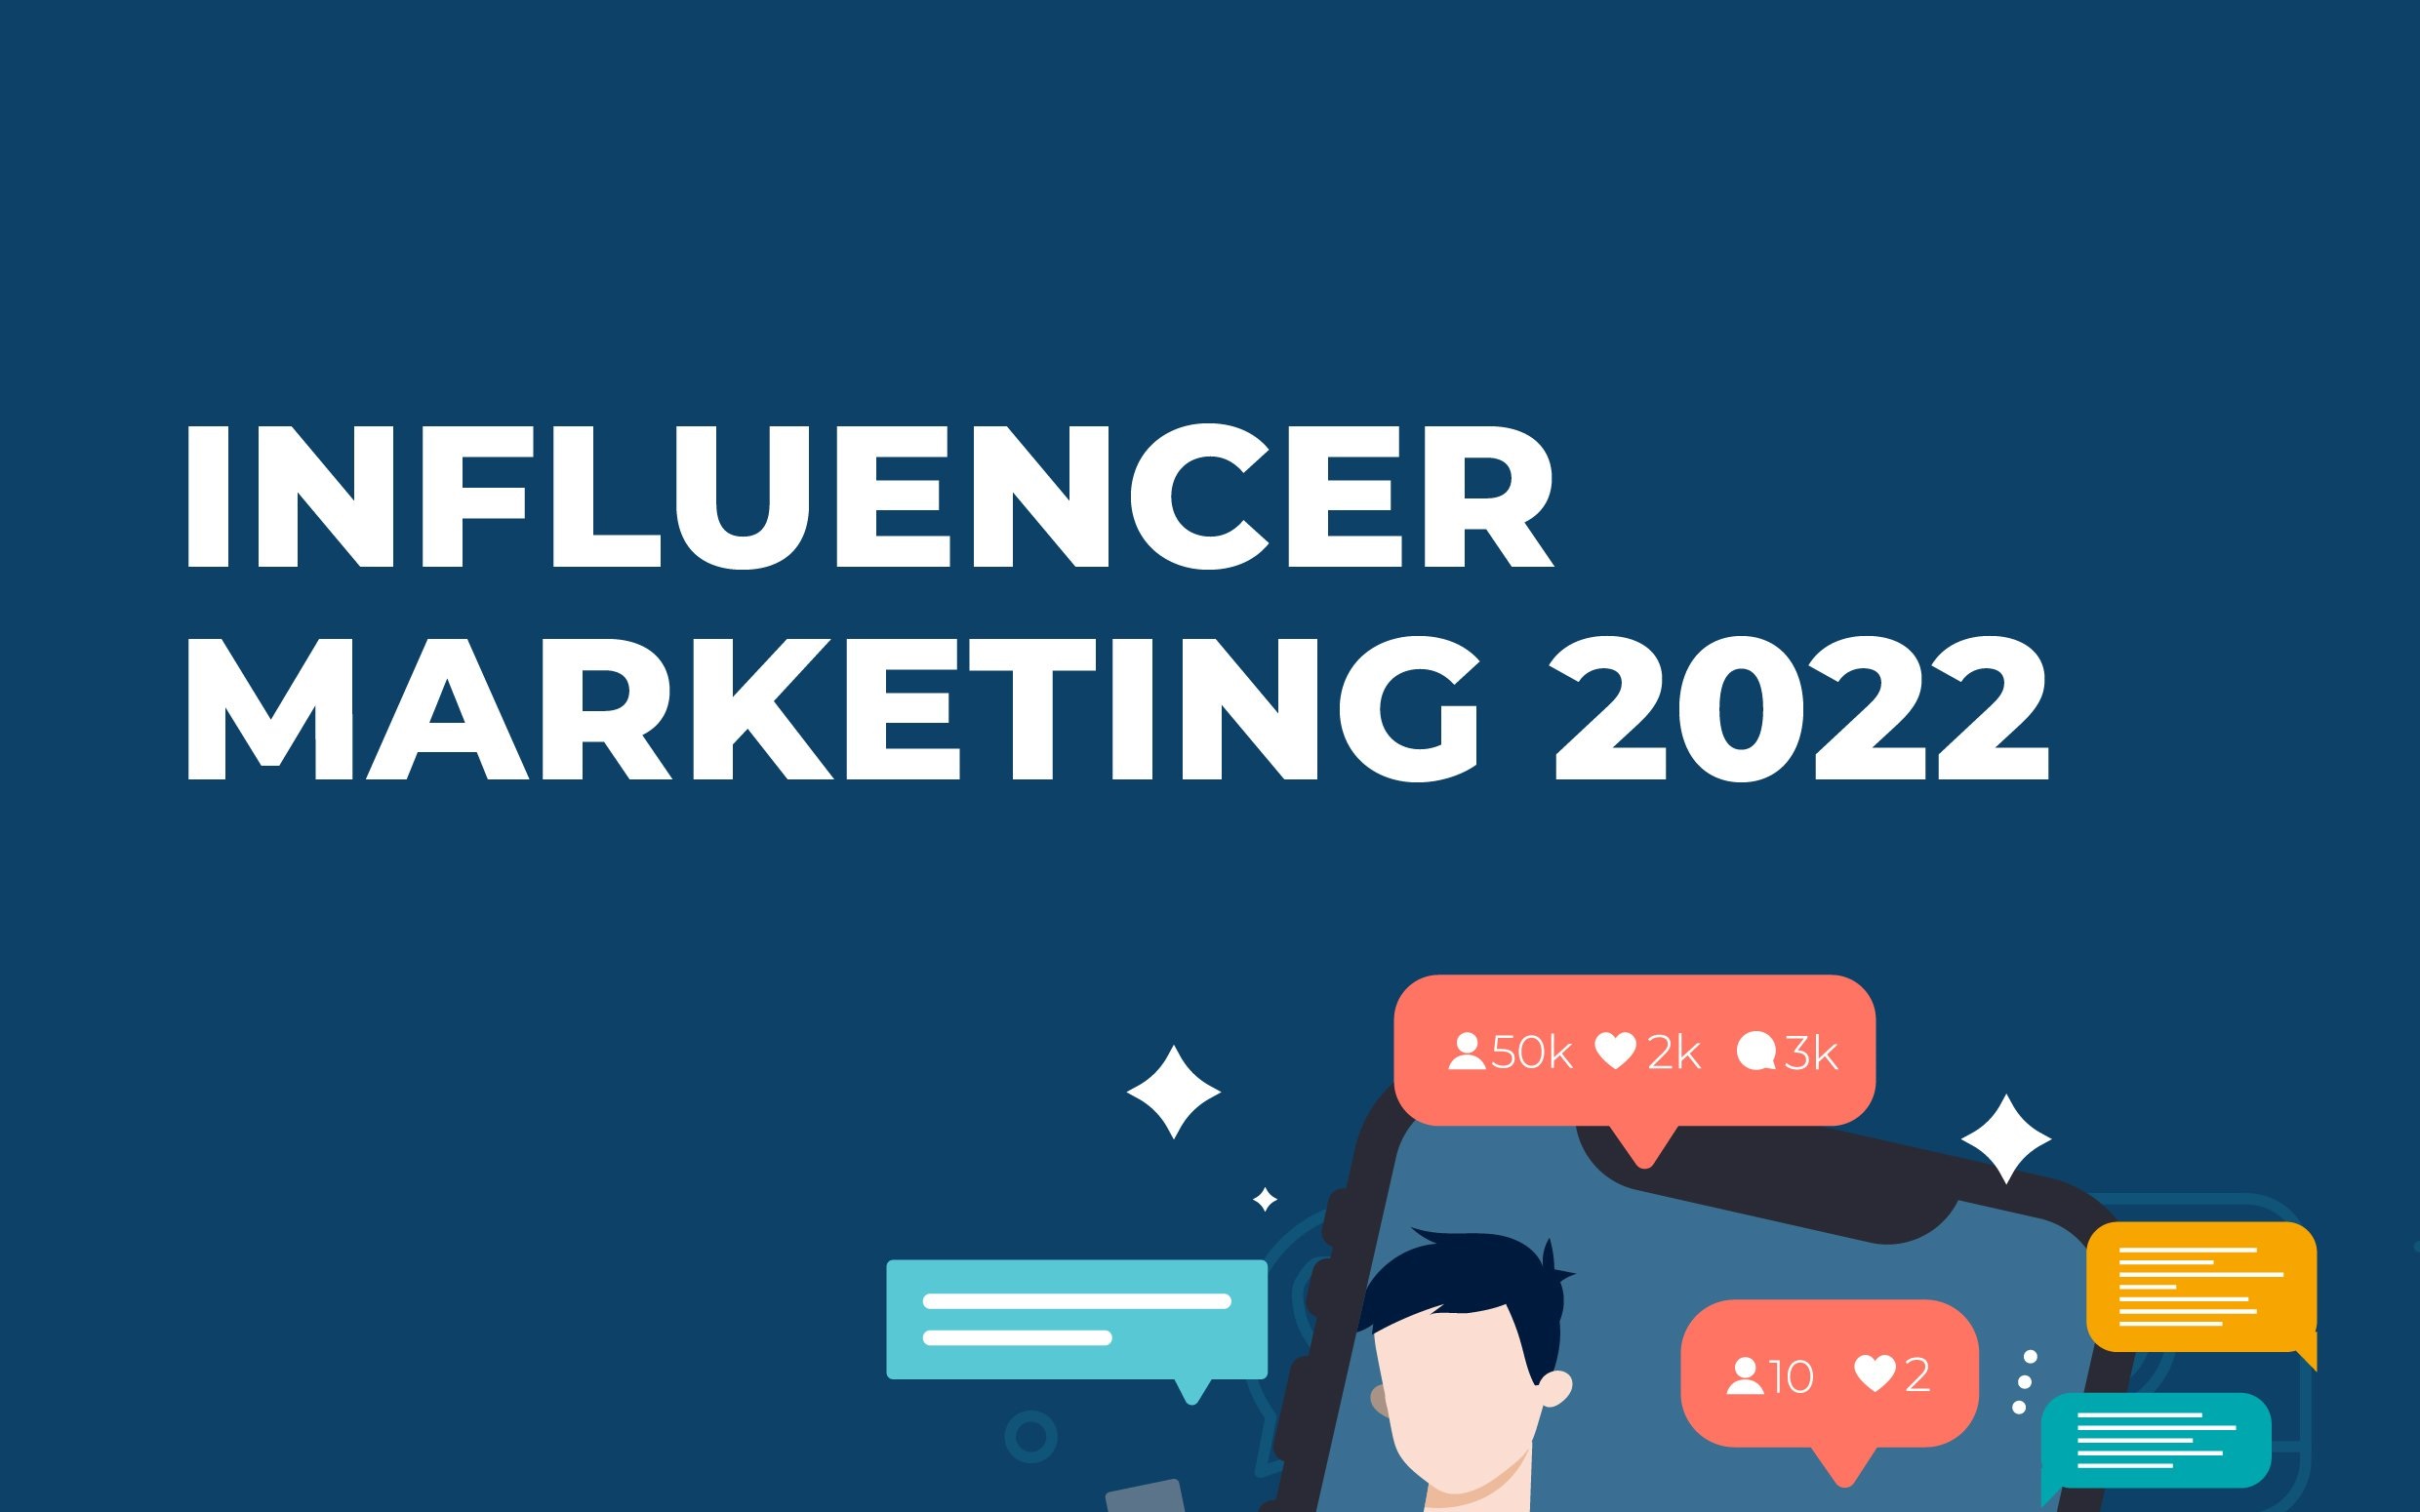 Top Influencer Marketing Agency in India, Top Influencer Marketing Agency, Influencer Marketing Agency, indidigital, Influencer Marketing, Marketing Agency